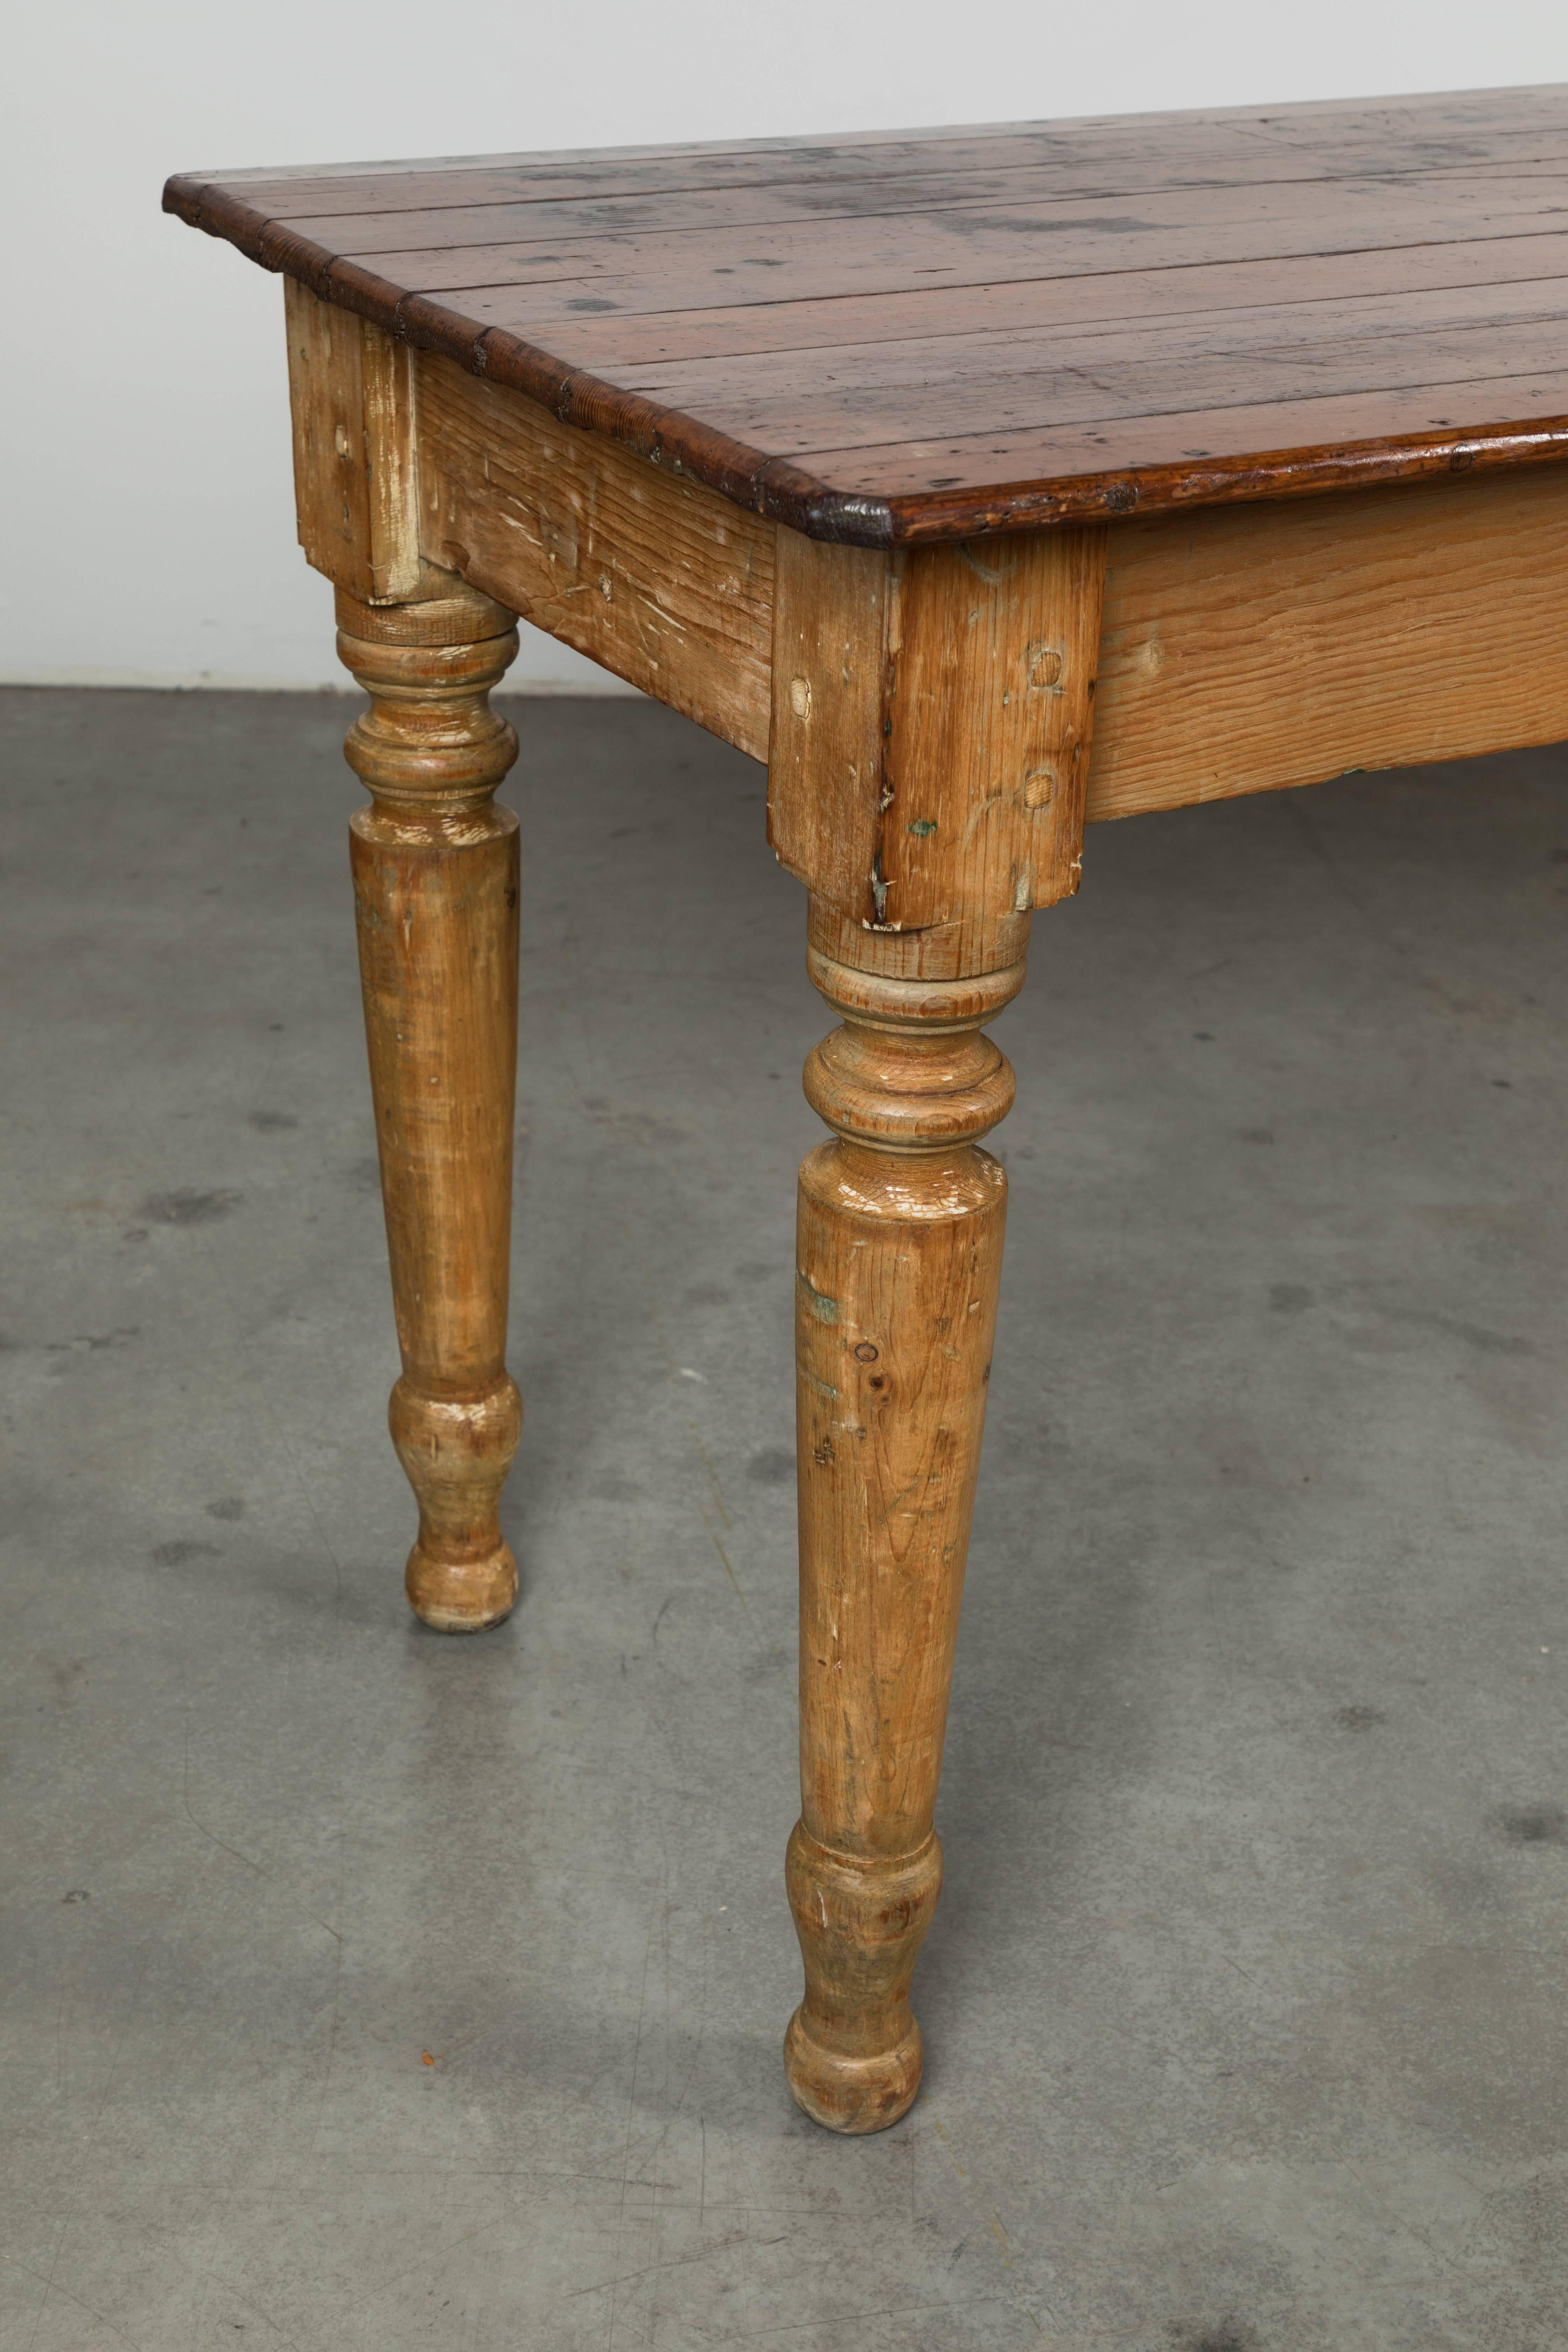 Great late 19th century general store counter with nicely turned legs. Perfect large dining table or centre island for work kitchen. A total workhorse. Could have casters put on to raise for work table. A trace layers of old paint and stain. Legs